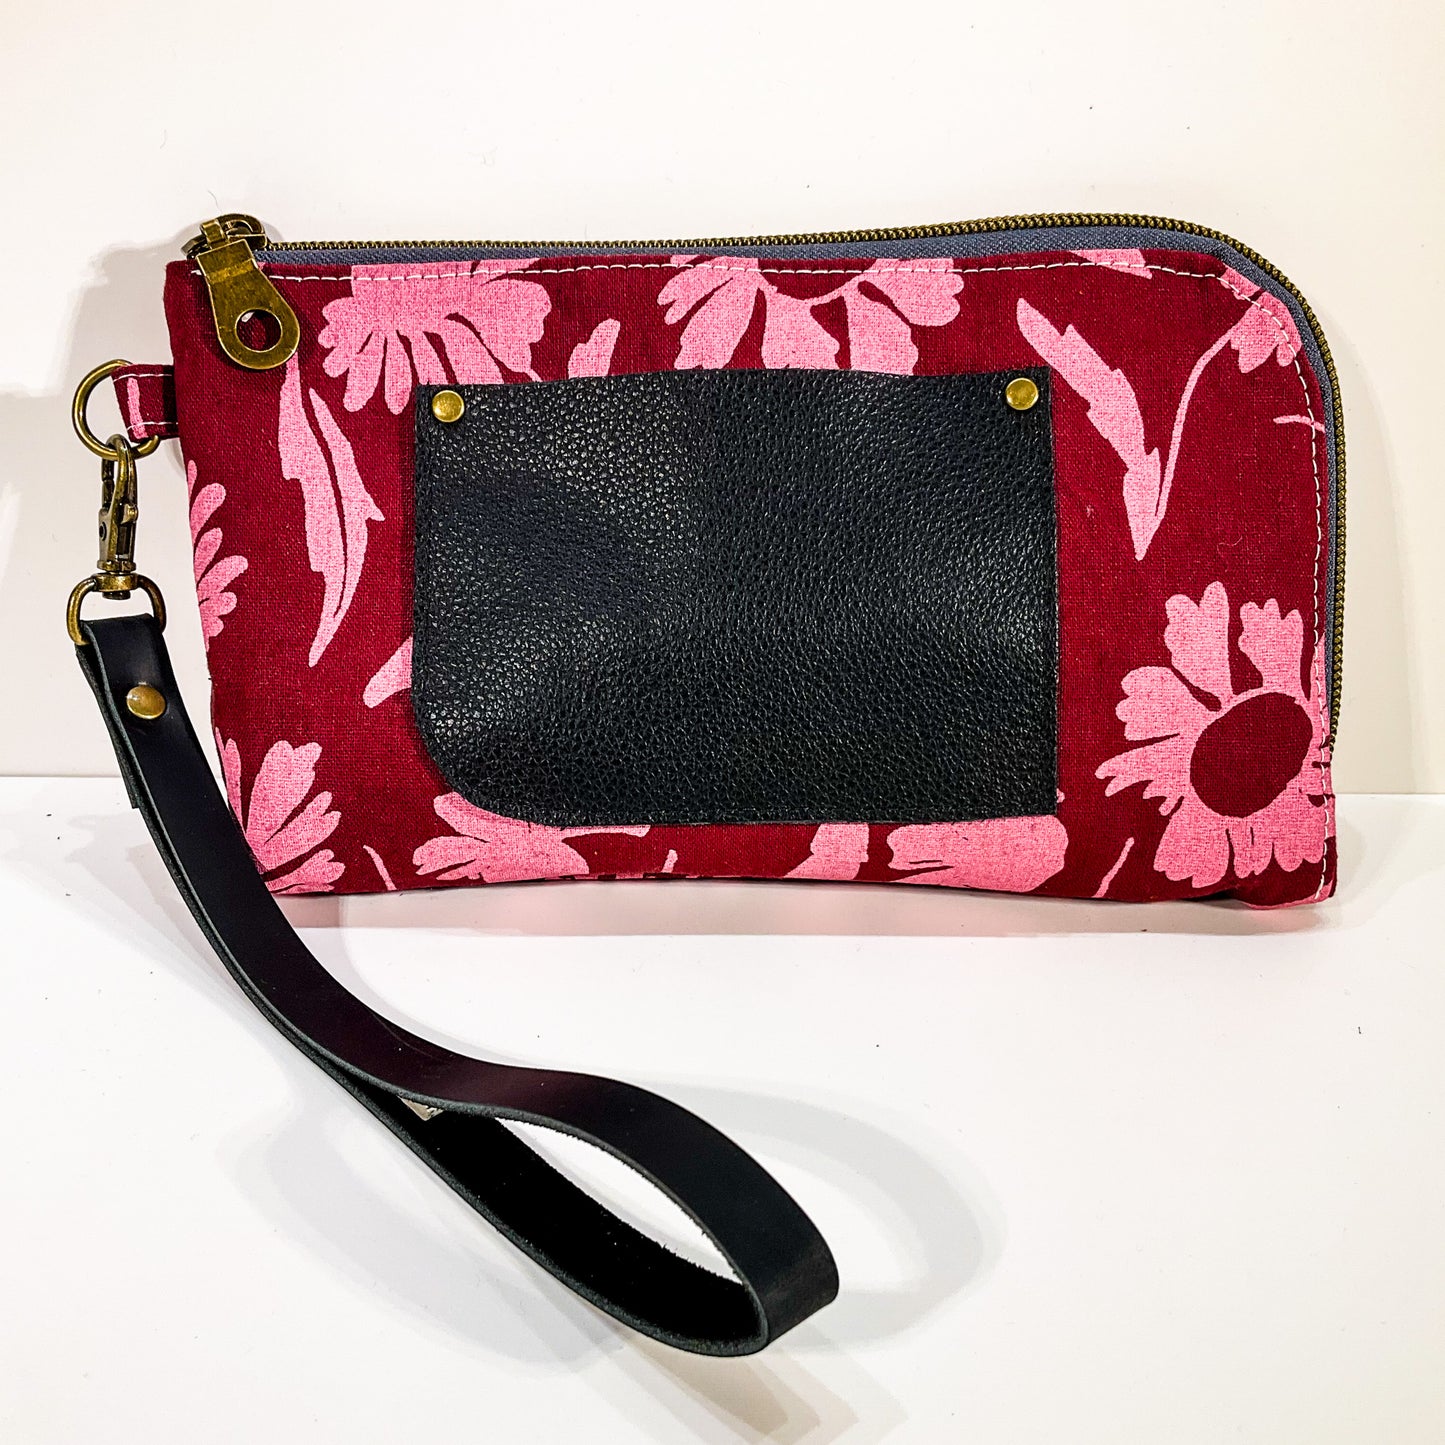 Yarrow Wristlet - Dried Florals in Bordeaux with Black Leather Pocket #13